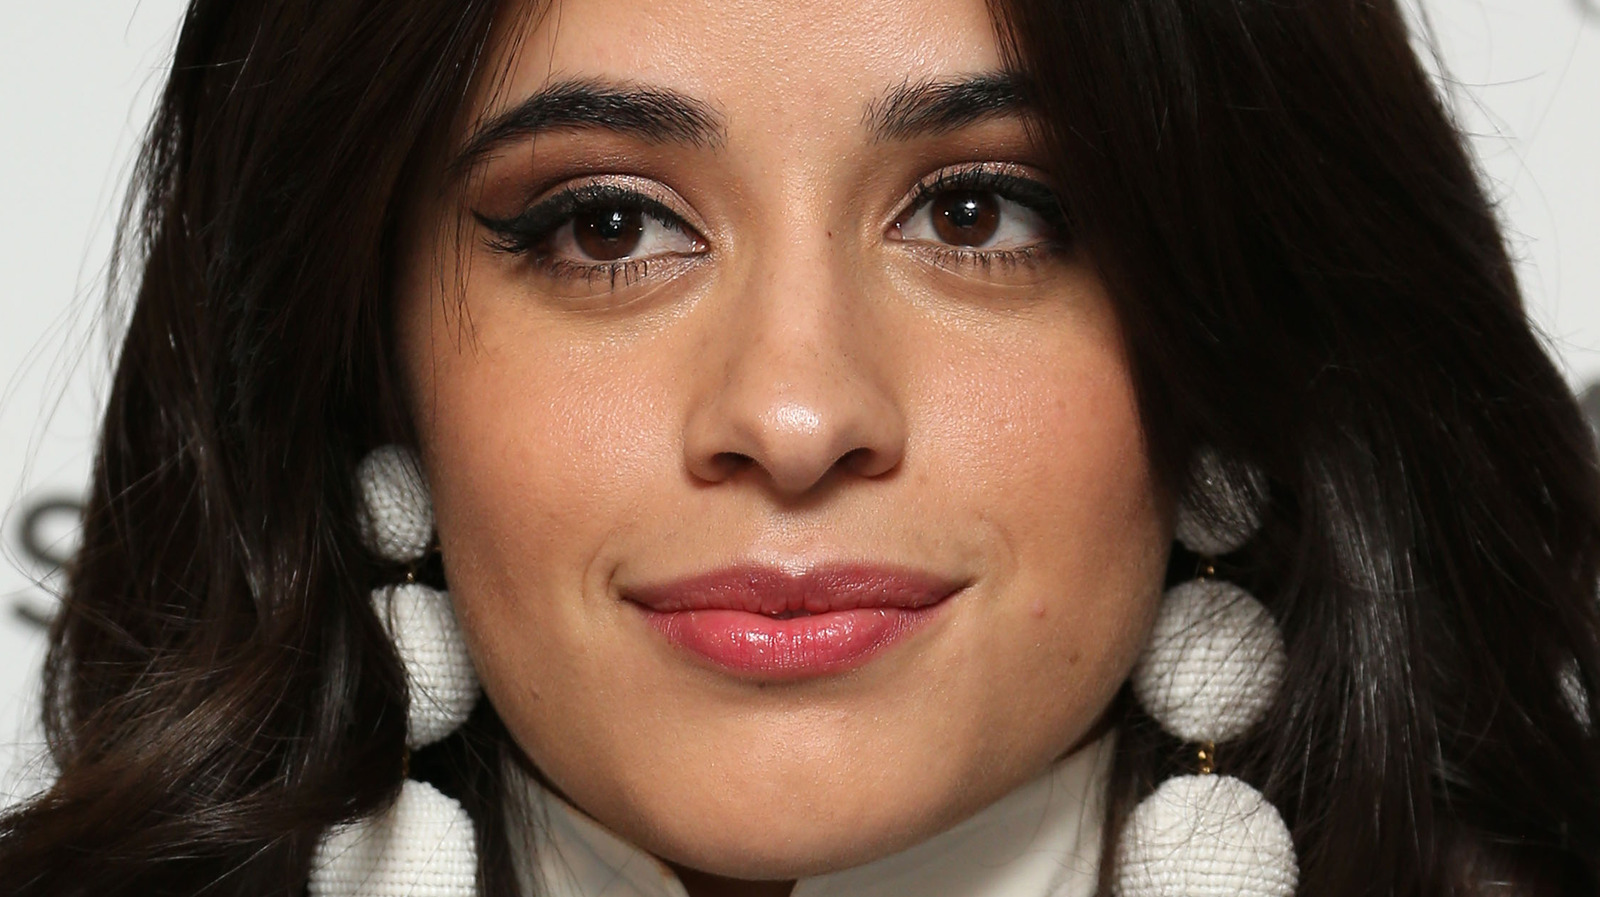 Camila Cabello's Reaction To Her Wardrobe Malfunction Is Perfectly